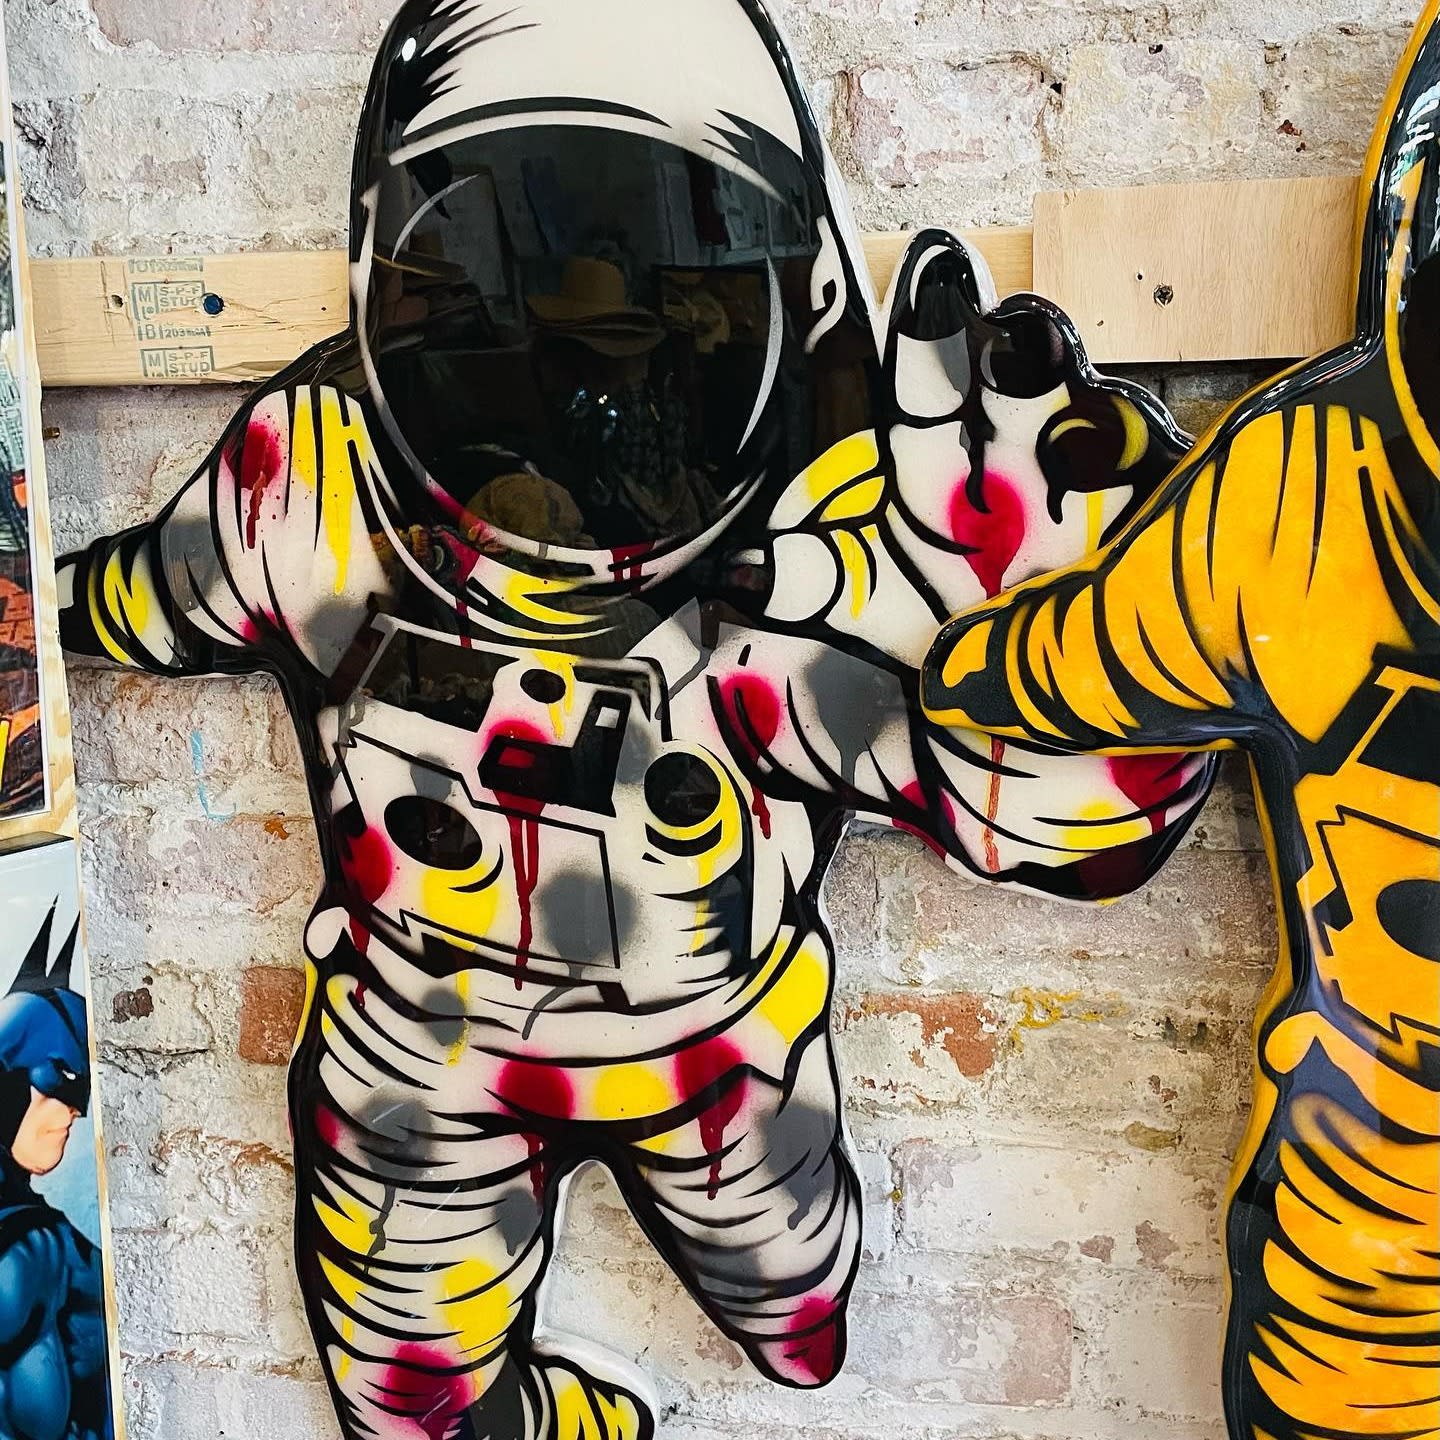 The Astronaut Graffiti Version - Featured Products - Peter Carnegie, Artist